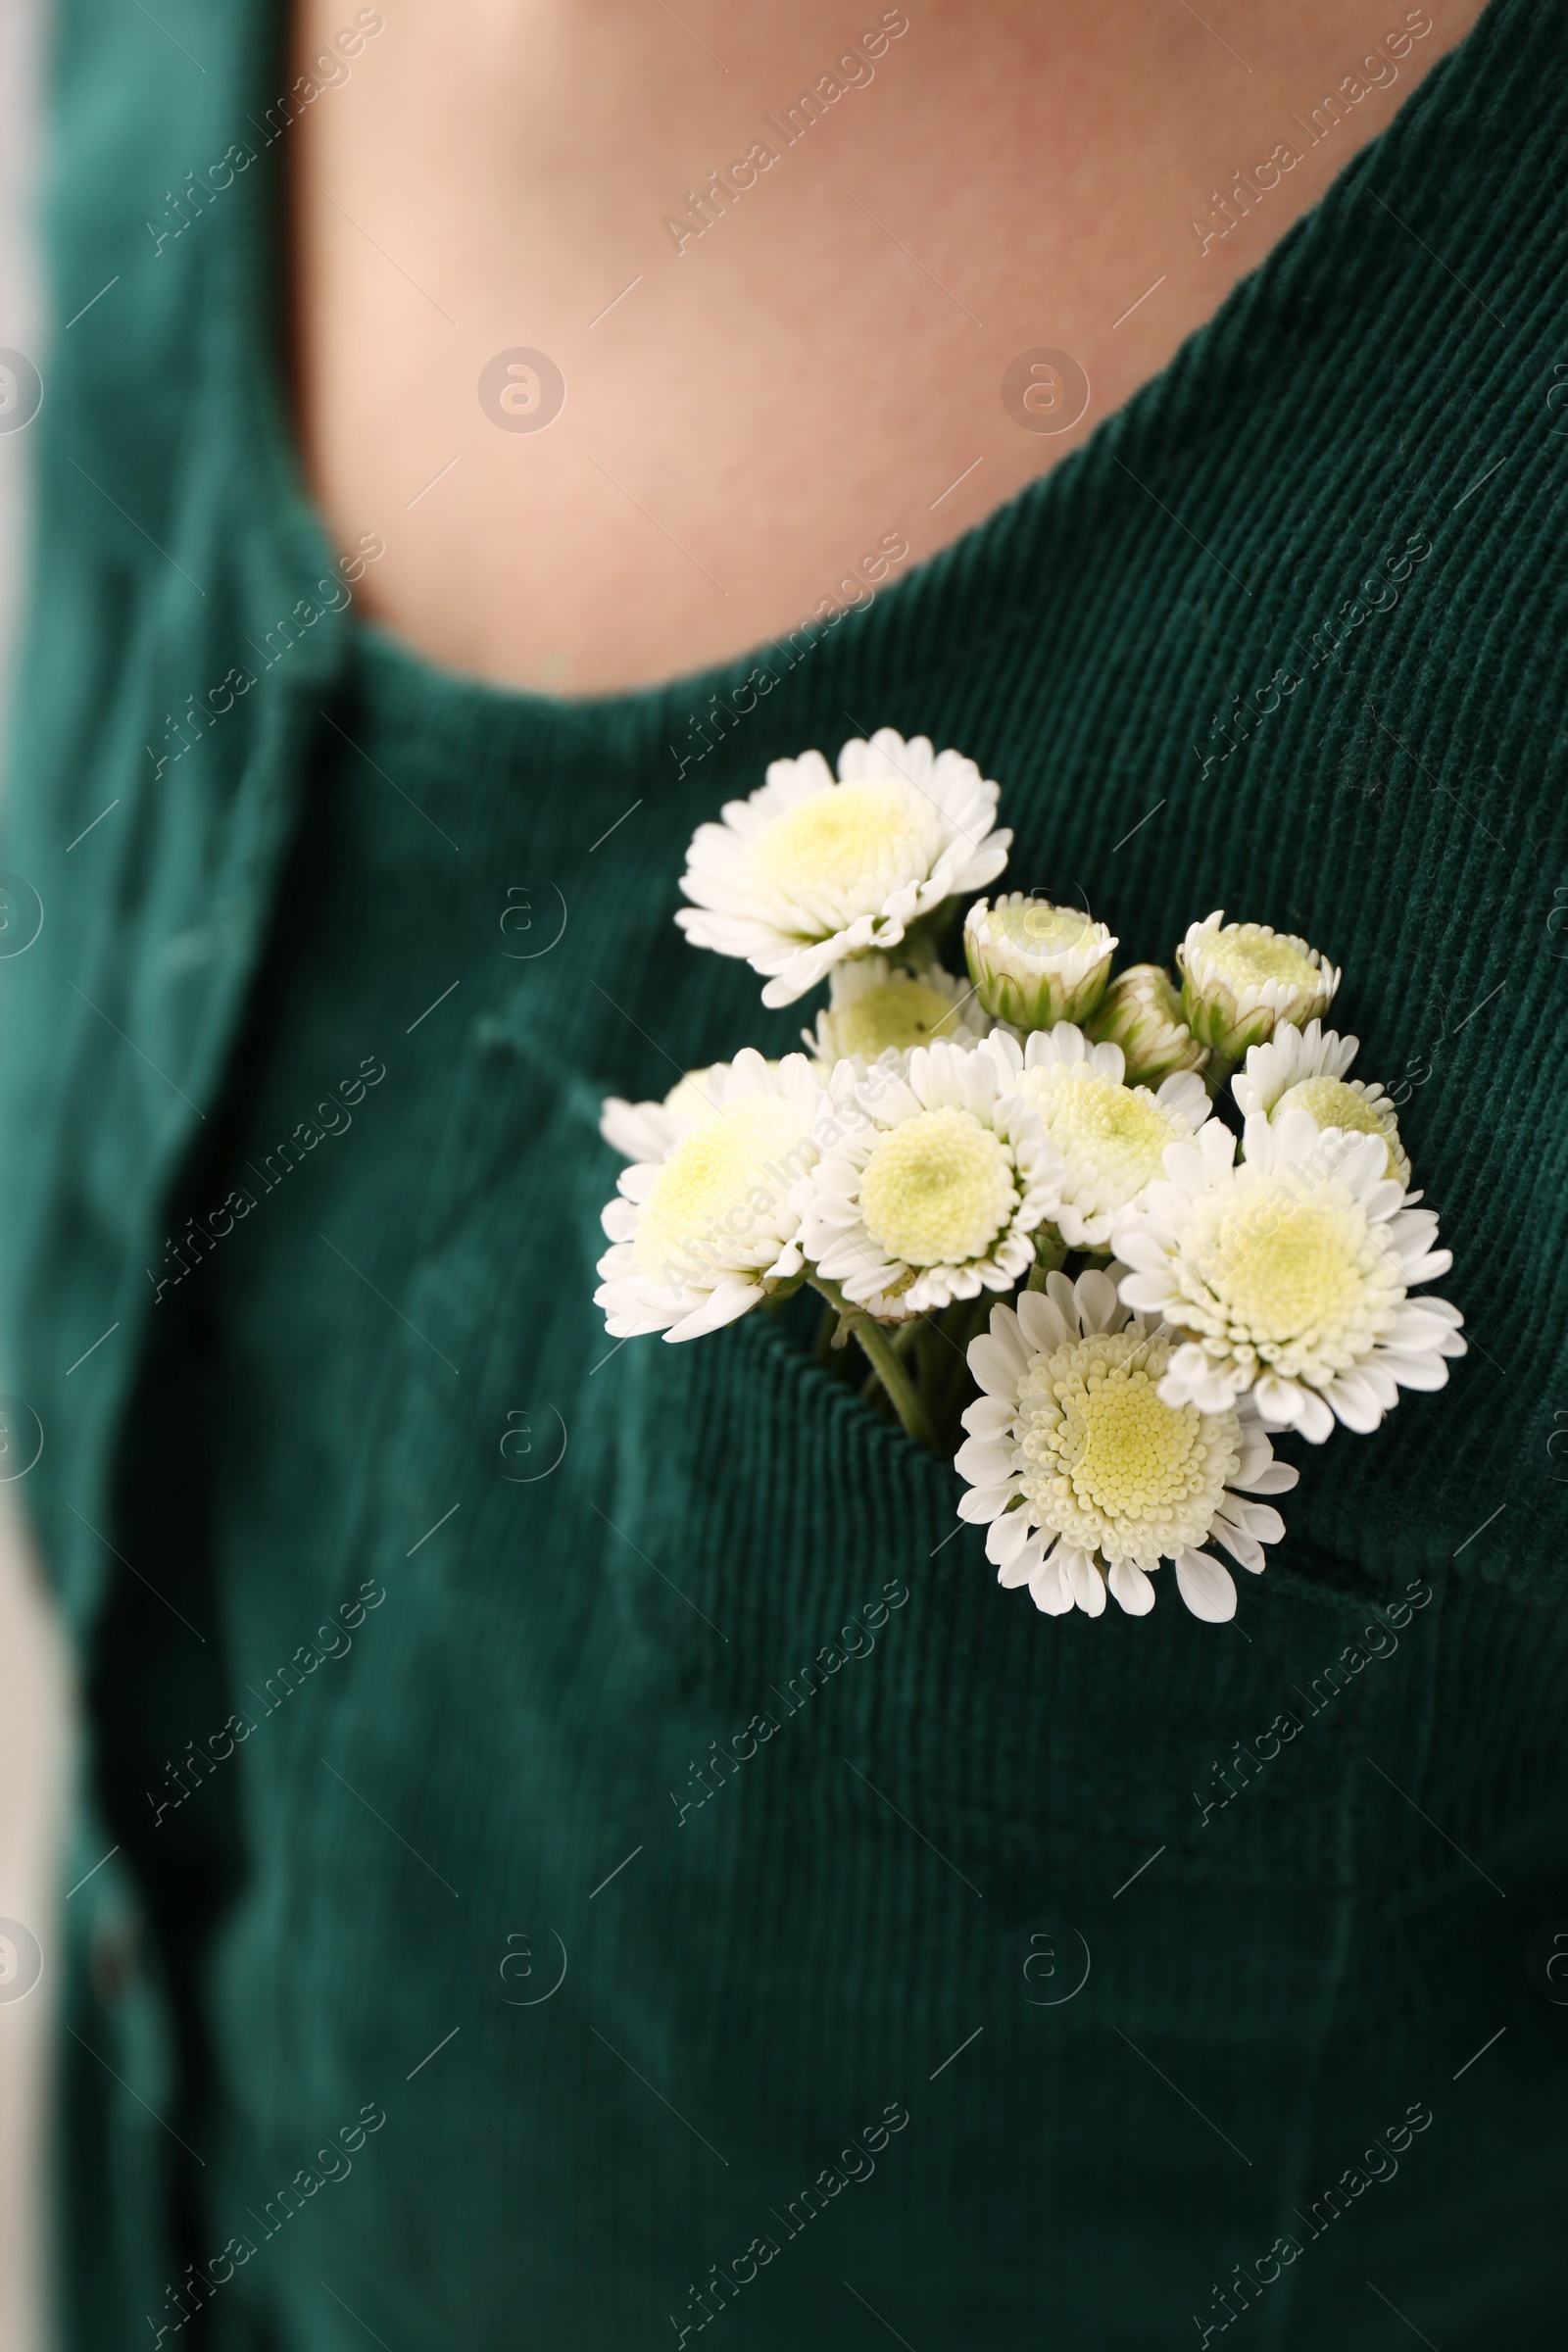 Photo of Woman wearing shirt with flowers in pocket, closeup